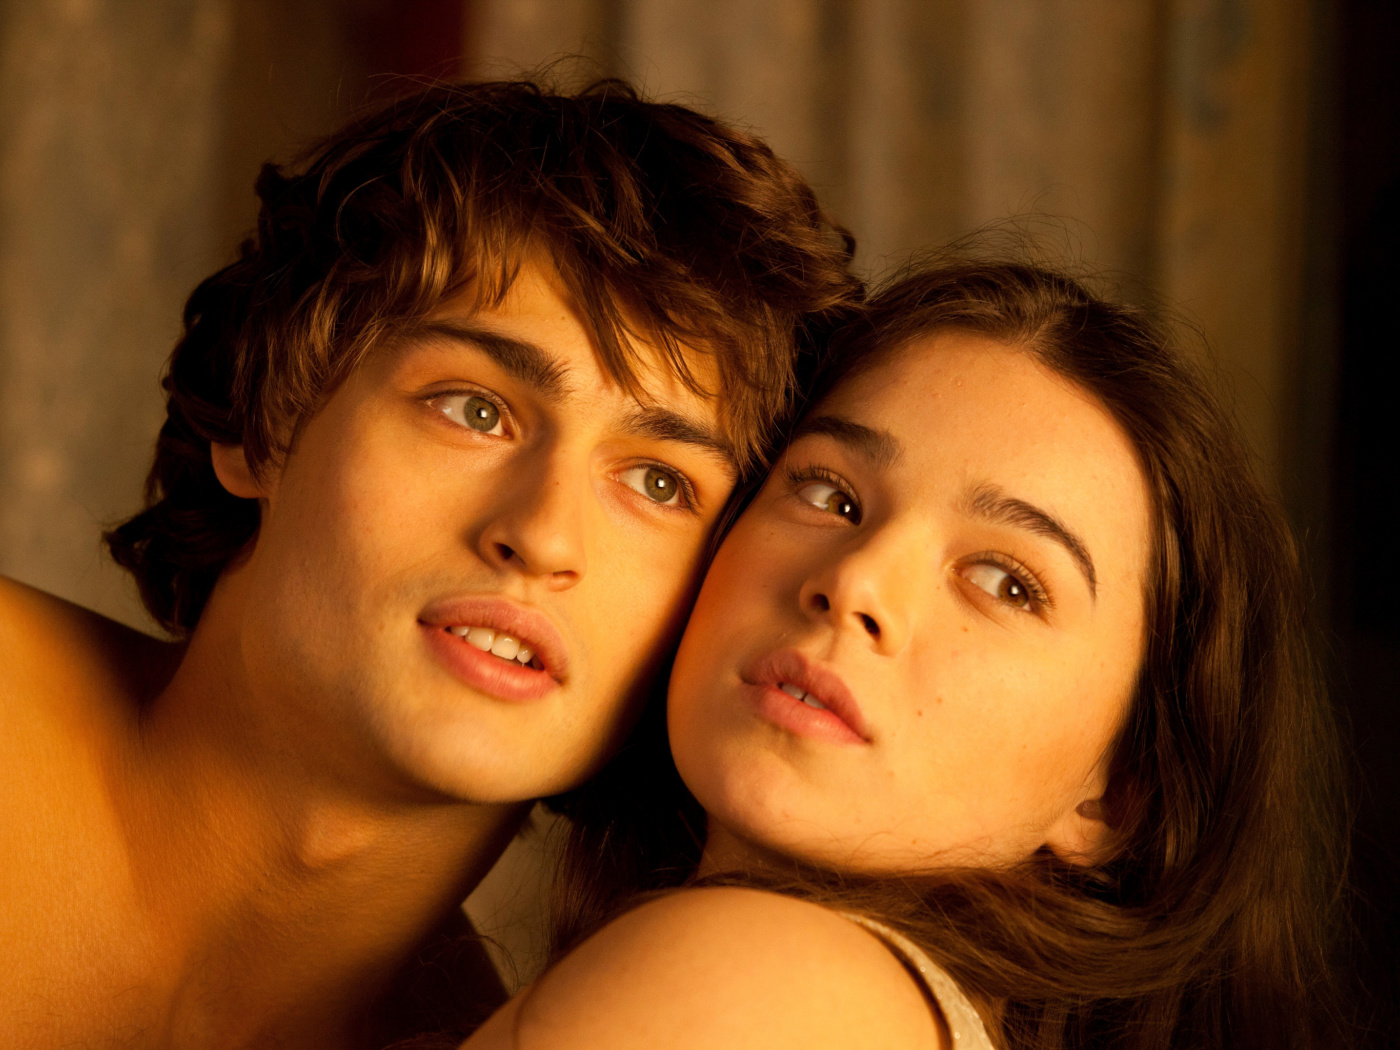 Romeo and Juliet with Hailee Steinfeld and Douglas Booth screenshot #1 1400x1050